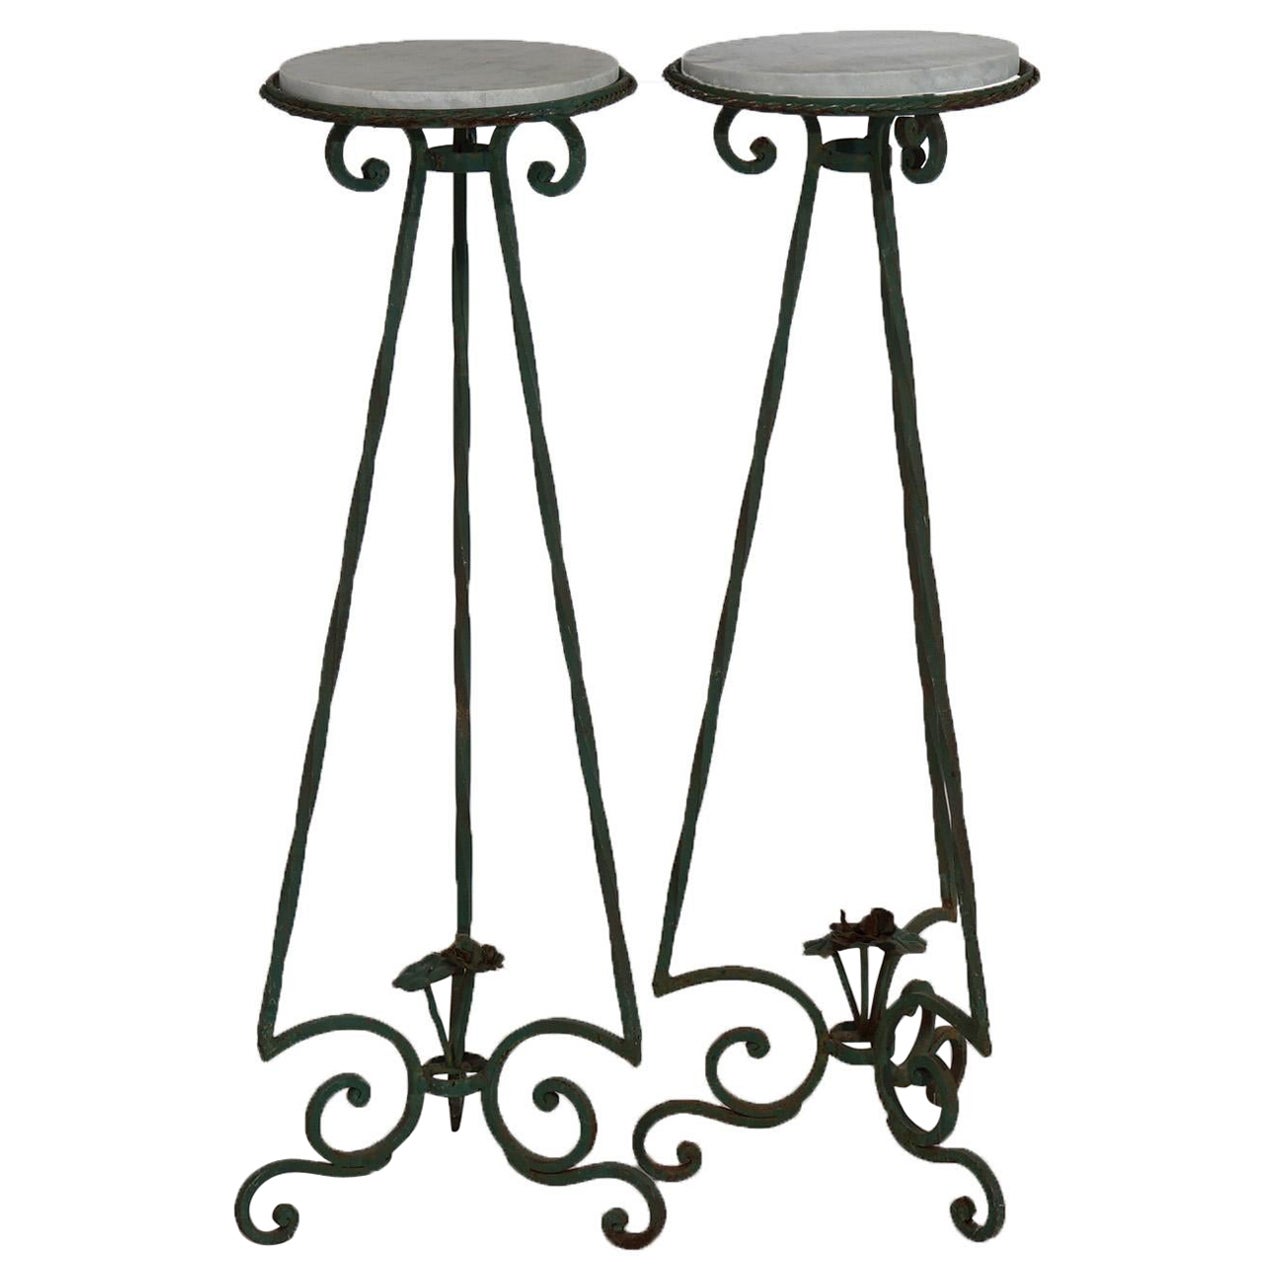 Antique Arts & Crafts Oscar Bach Style Wrought Iron & Marble Plant Stands C1920 For Sale